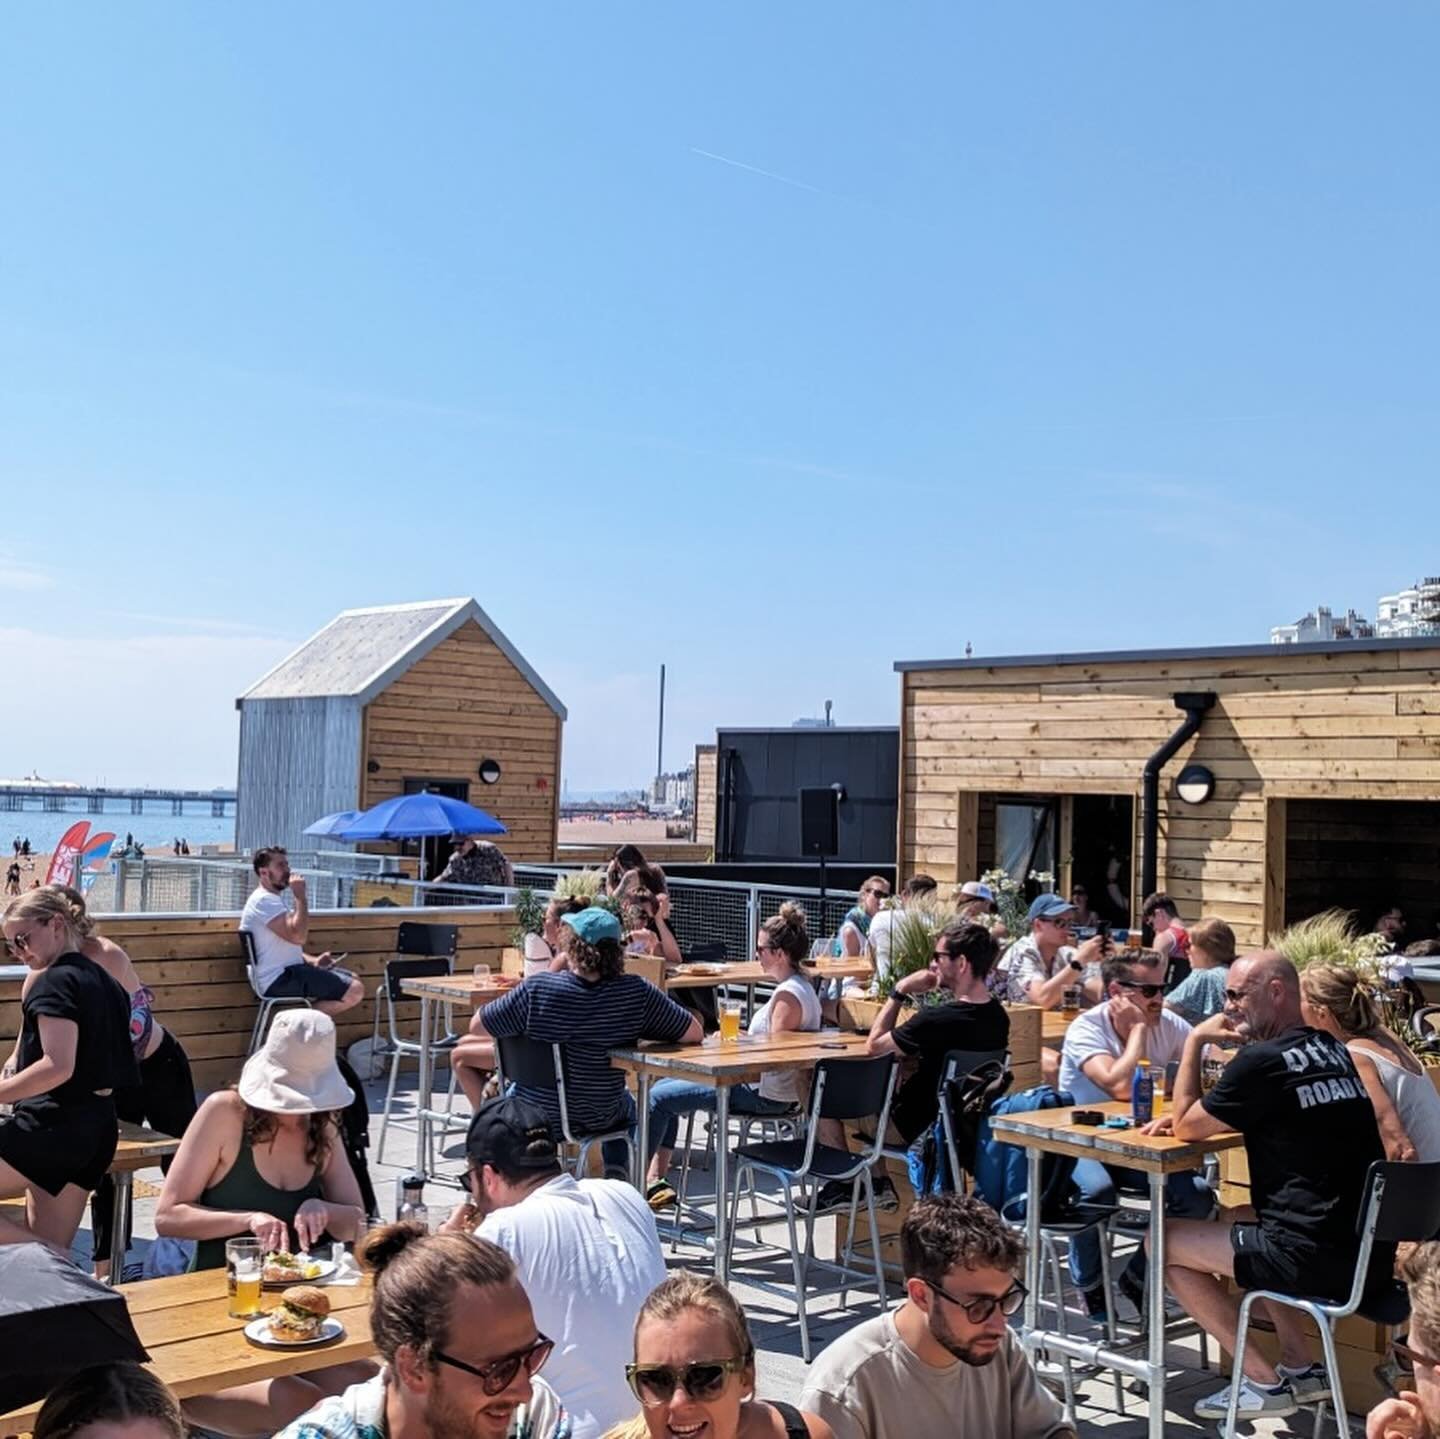 Rooftop parties are back from the Early May Bank Holiday weekend kicking off our summer season ☀️

We can all feel it&hellip; the summer is coming. We felt the sunny rays on our cheeks, and now we want MORE. 

Who can&rsquo;t wait to be sipping a del